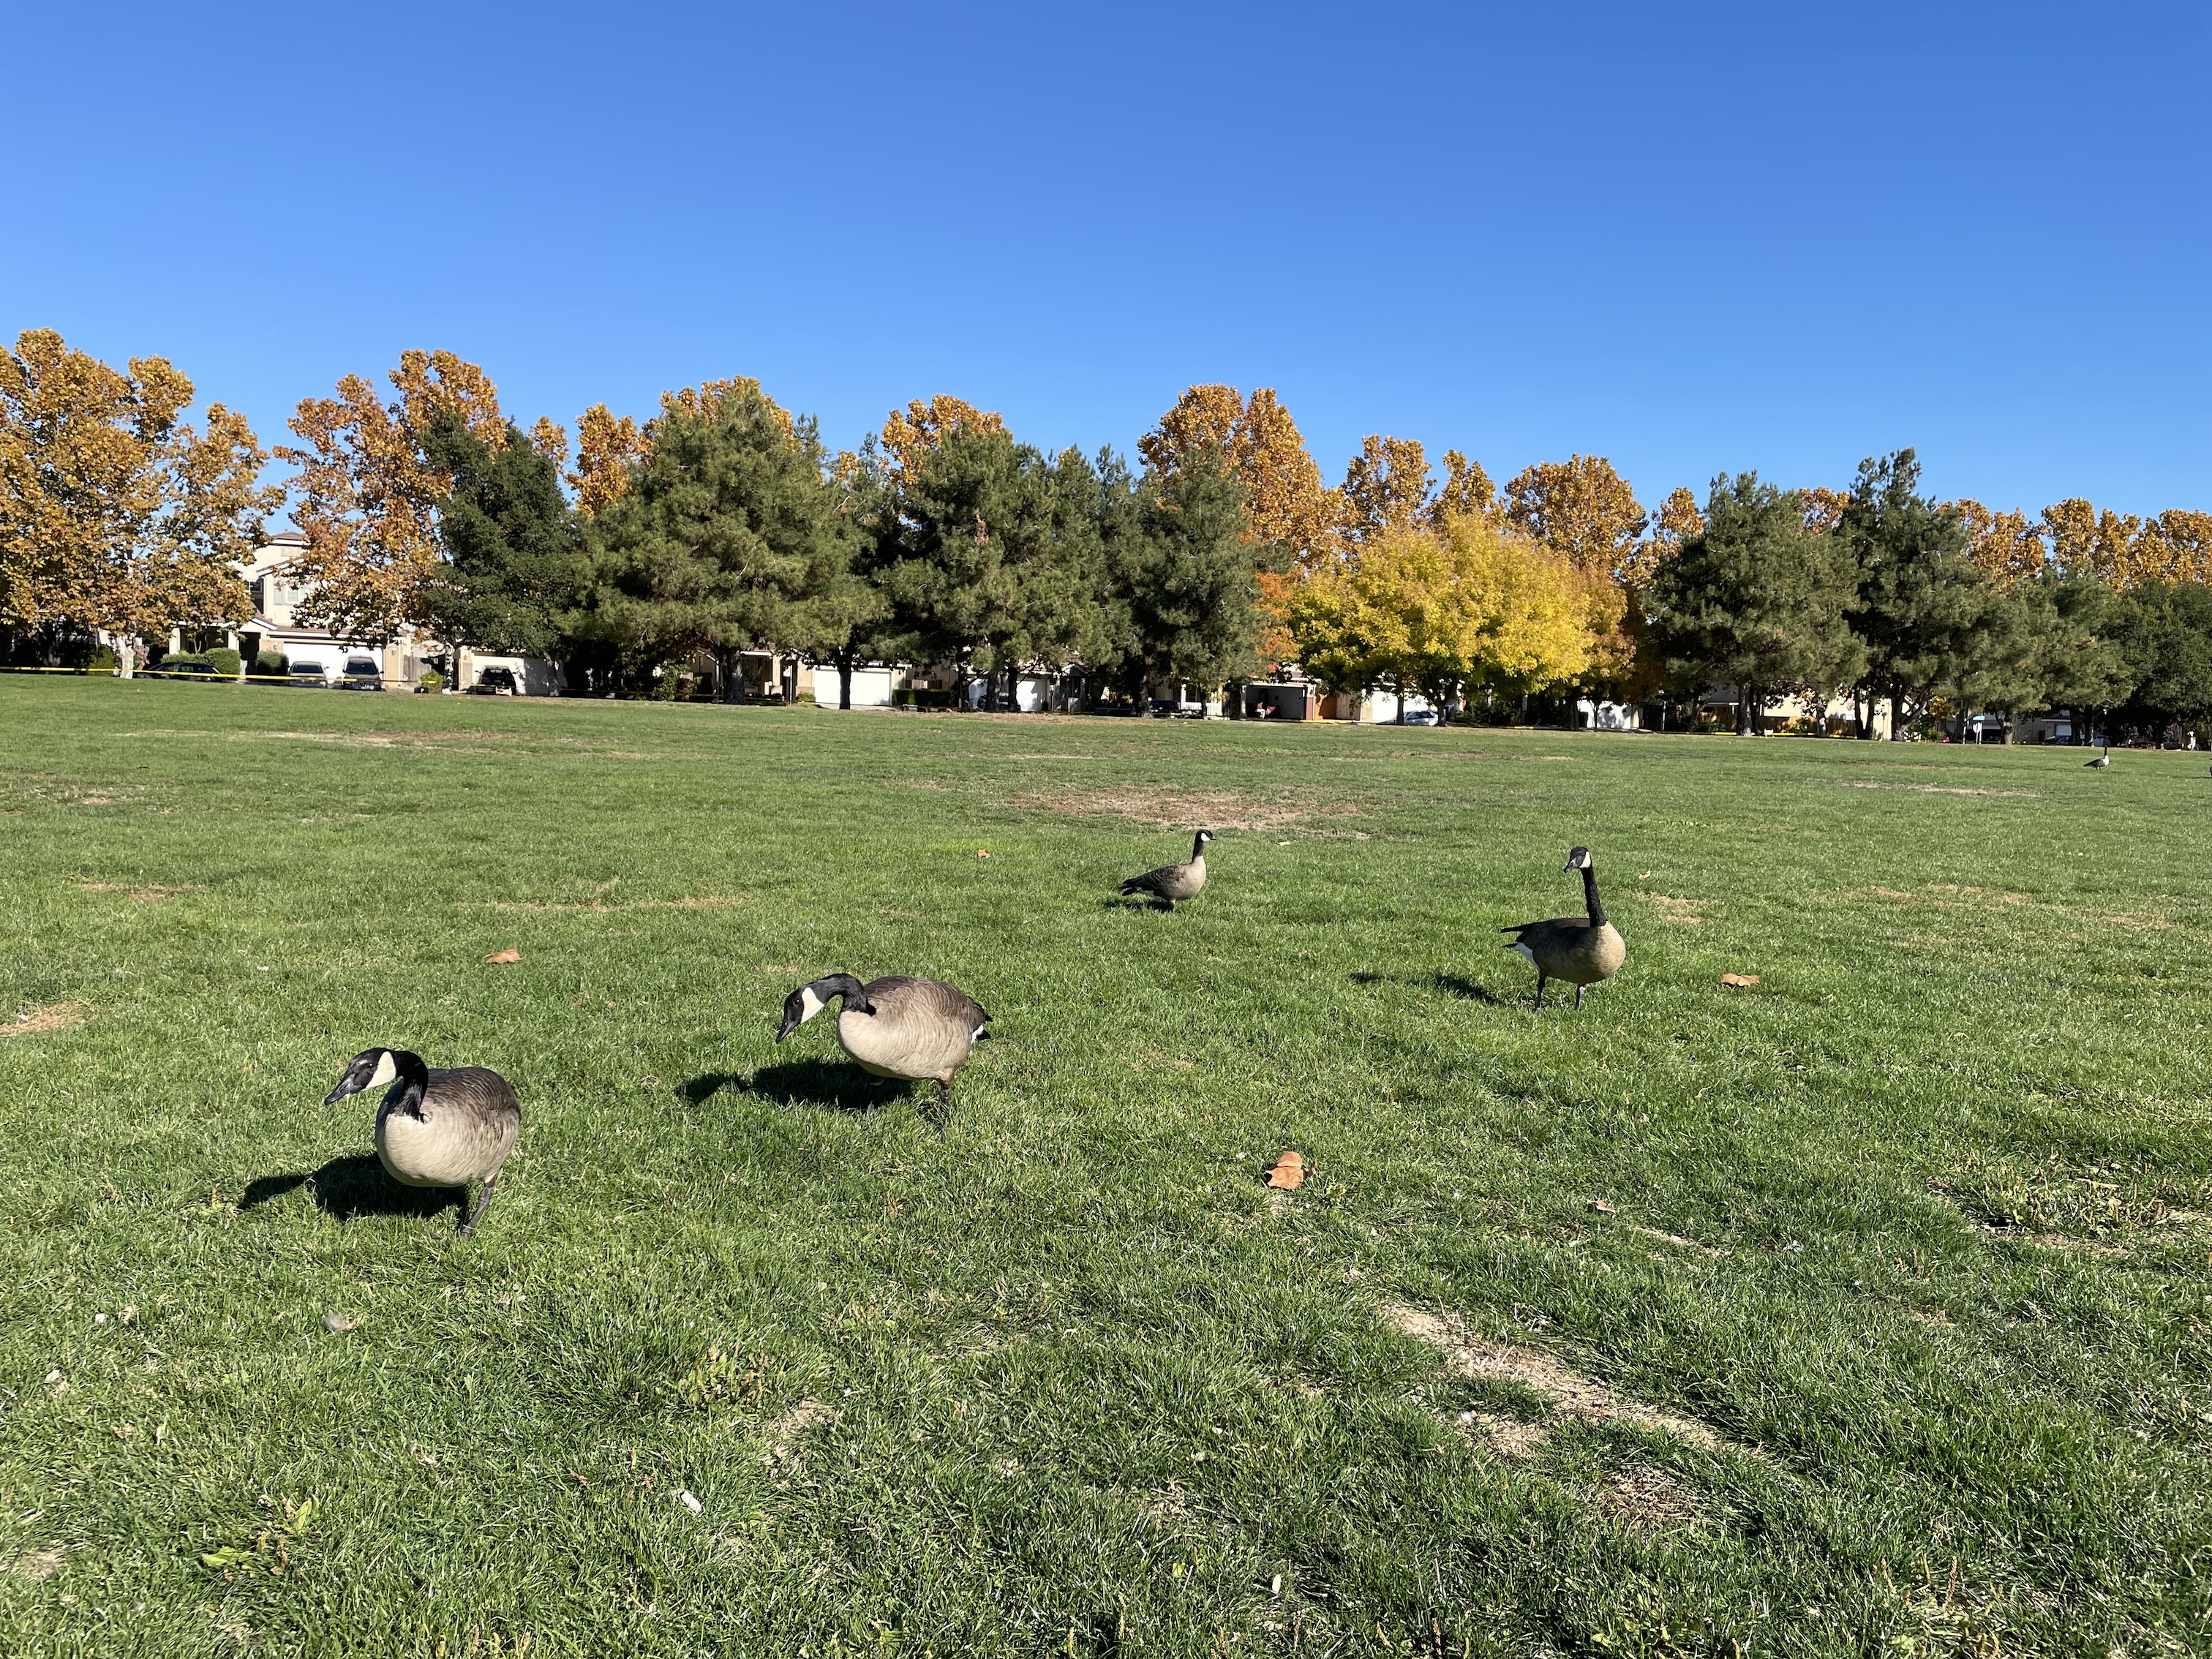 Canada geese in a field of grass